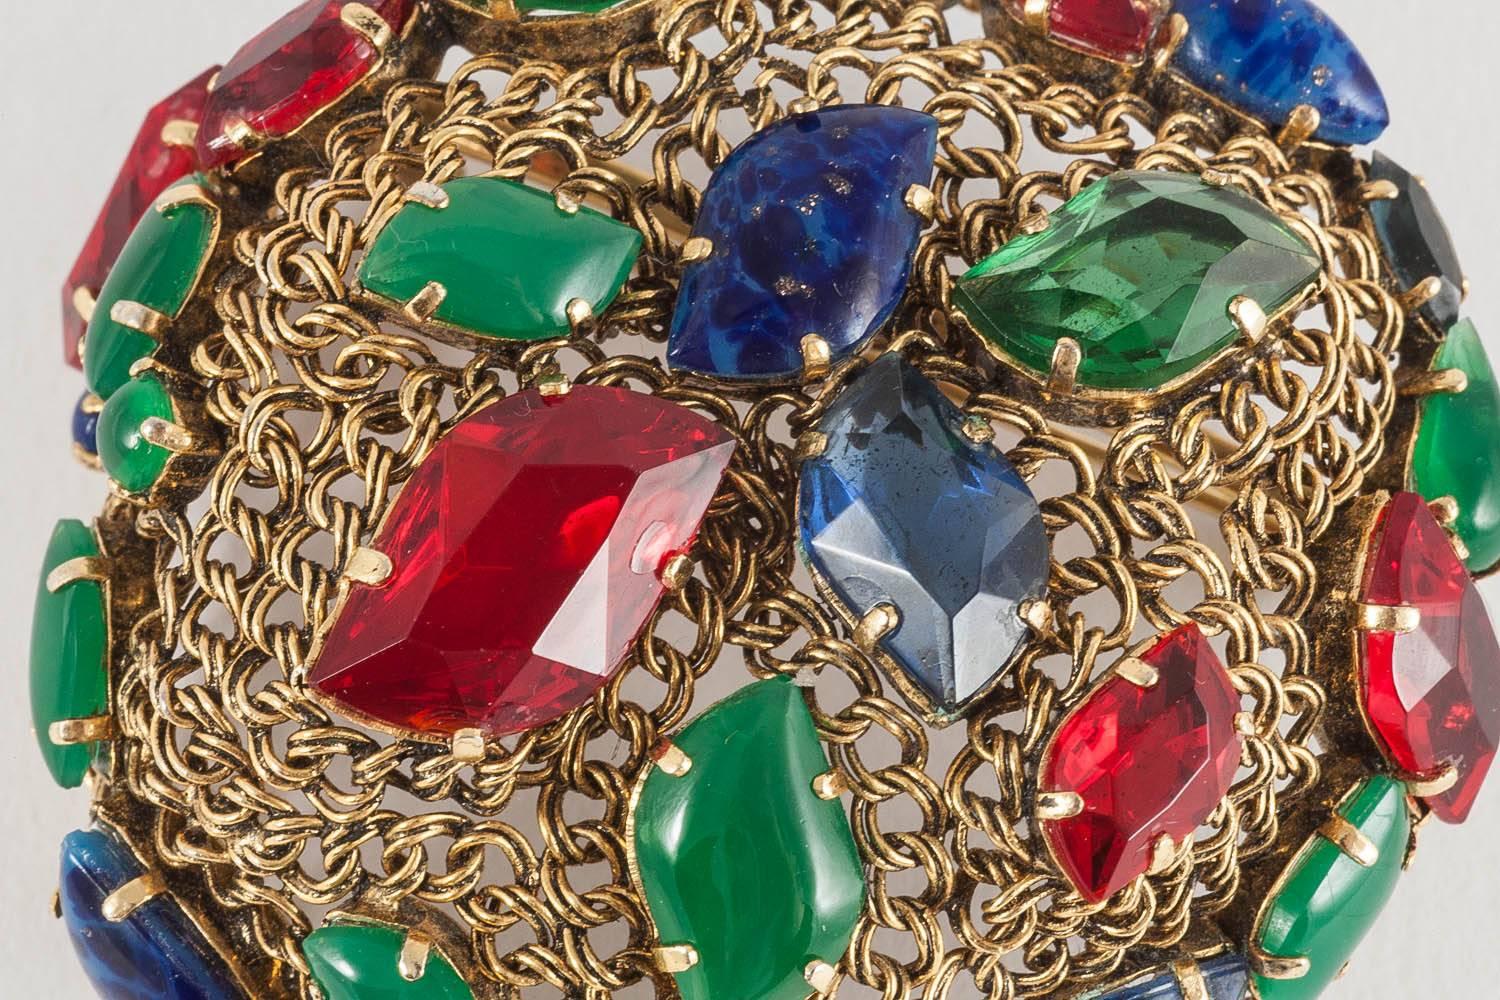 Cleverly constructed in gilded metal chain, woven in an asymmetrical 'basket' form, using unusually shaped stones of ruby, sapphire and emerald colours, some clear, others opaque.  This is a really unusual piece. One of Grosse Germany's earlier